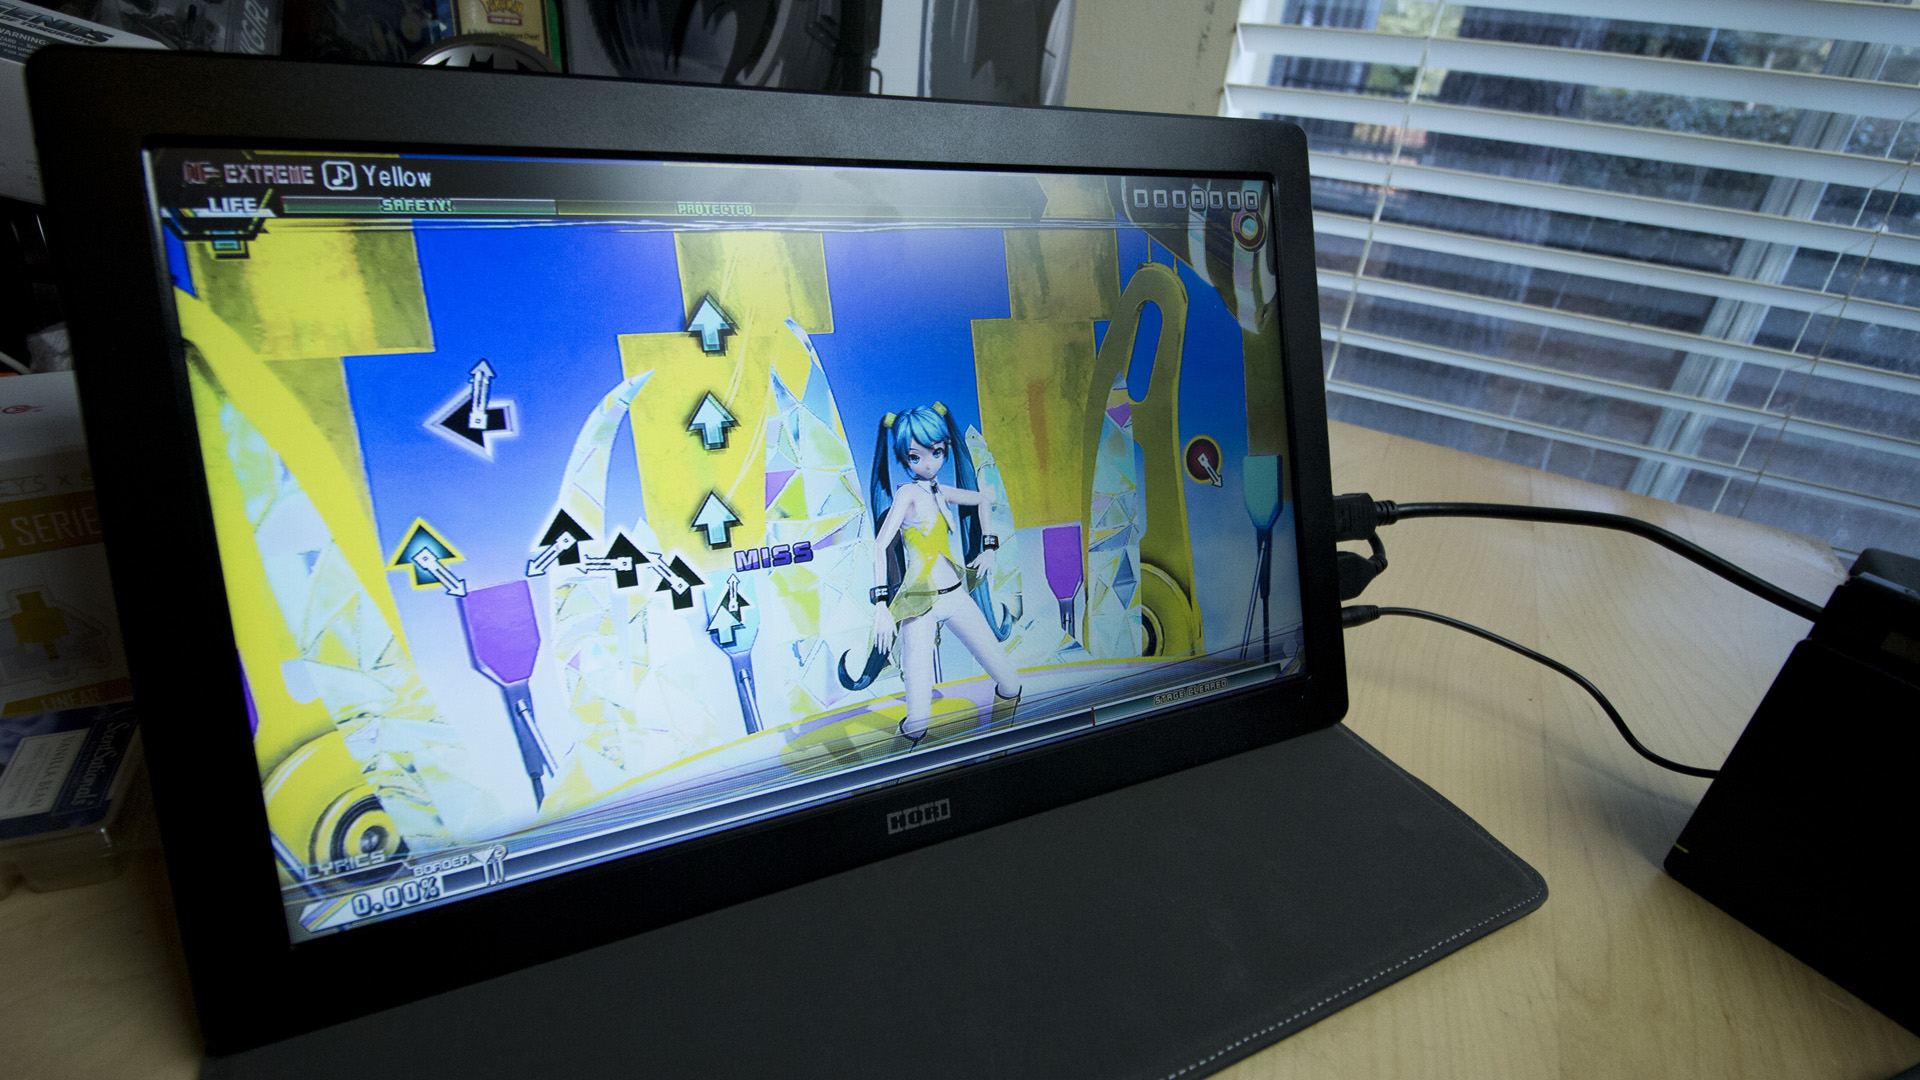 Hori’s Portable Gaming Monitor Isn’t Pretty, But It Works